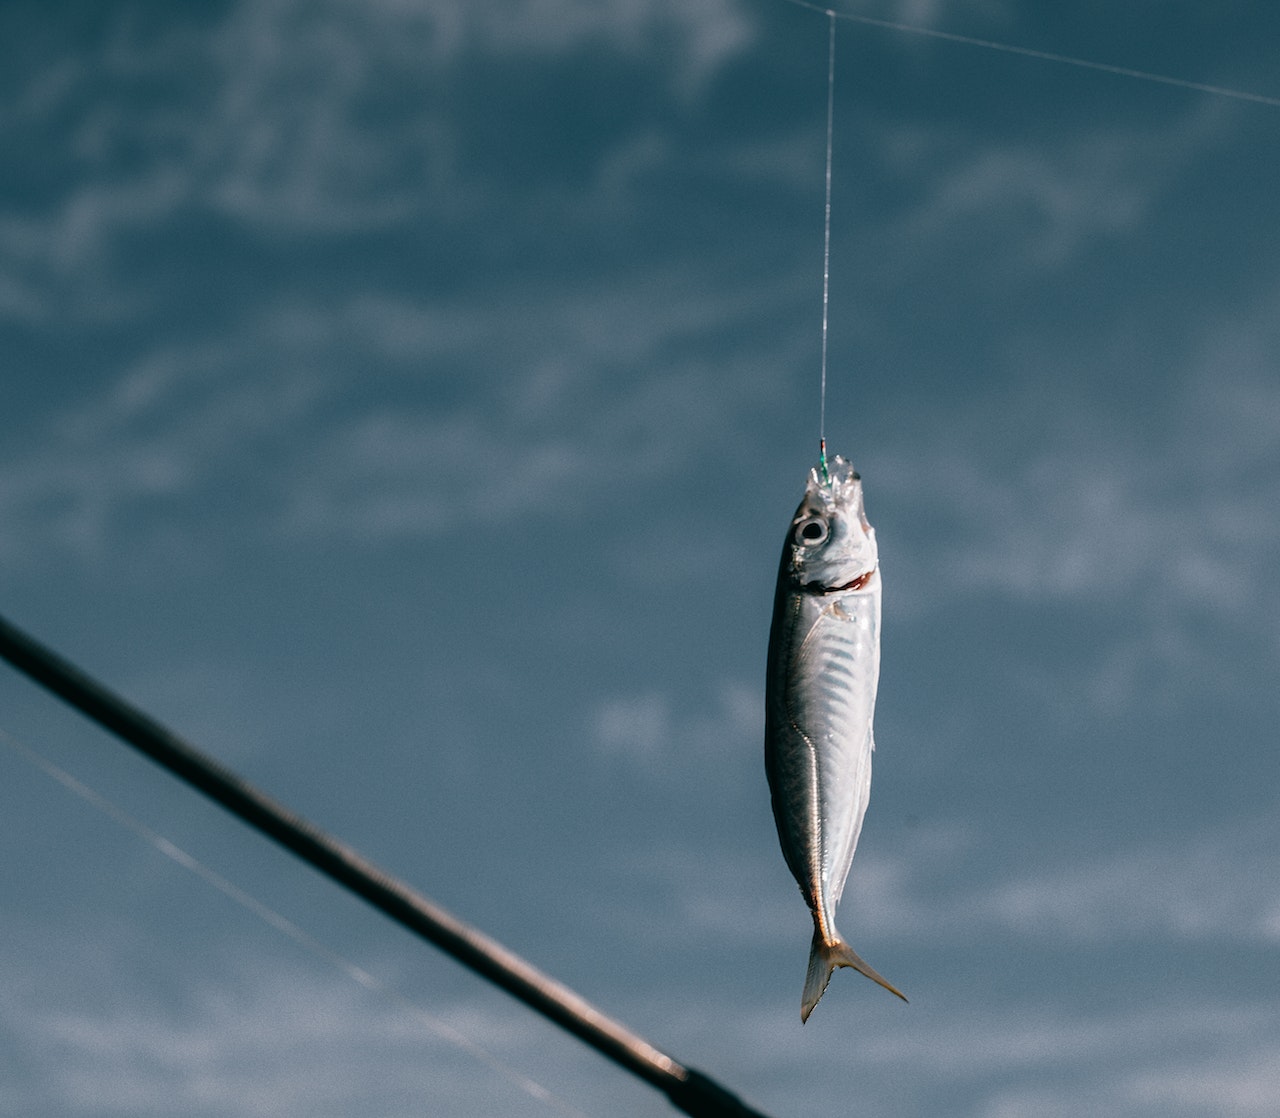 Fish hanging on hook against blurred background